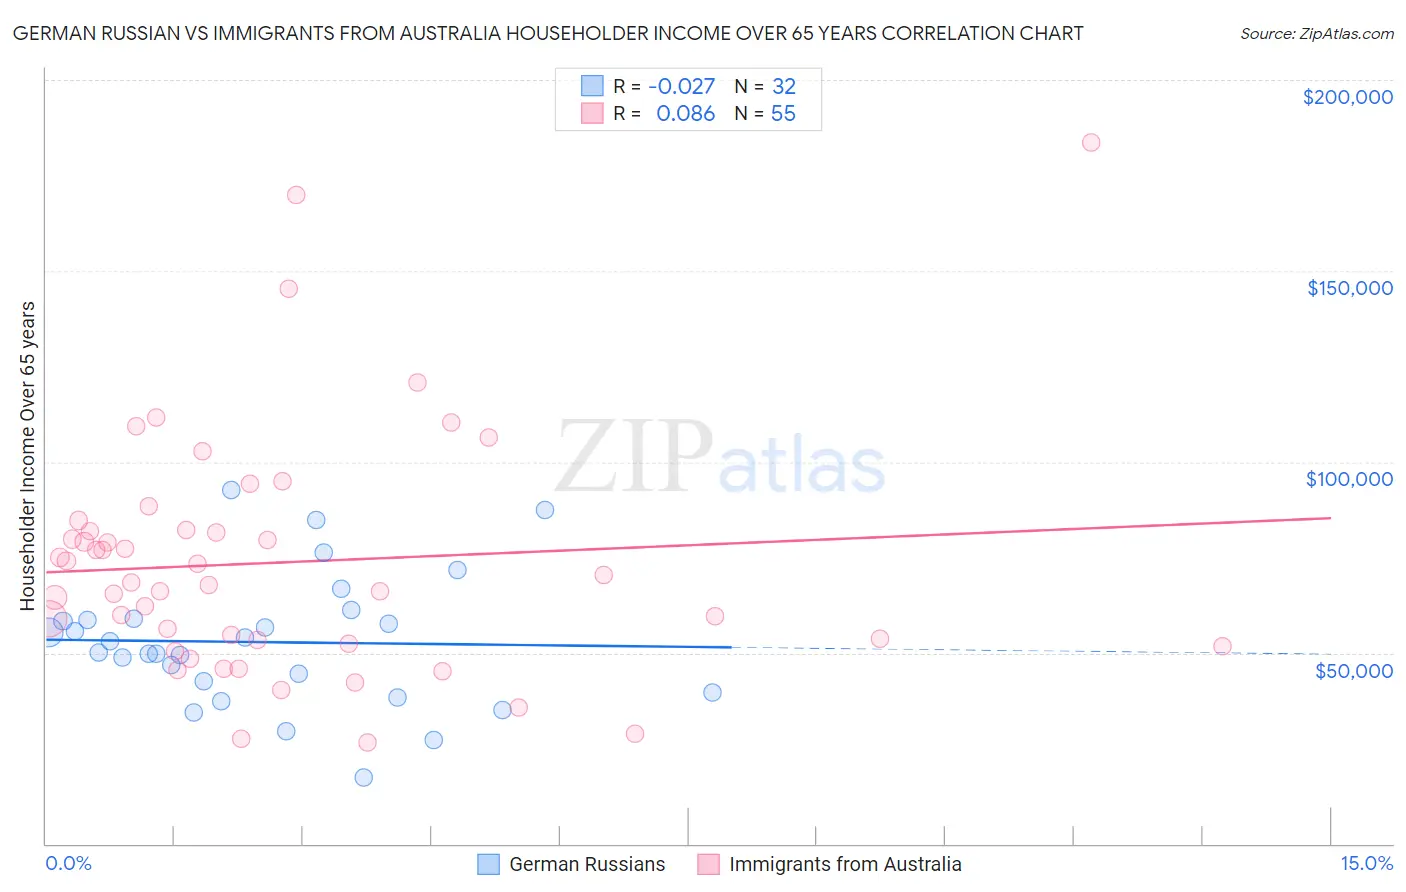 German Russian vs Immigrants from Australia Householder Income Over 65 years